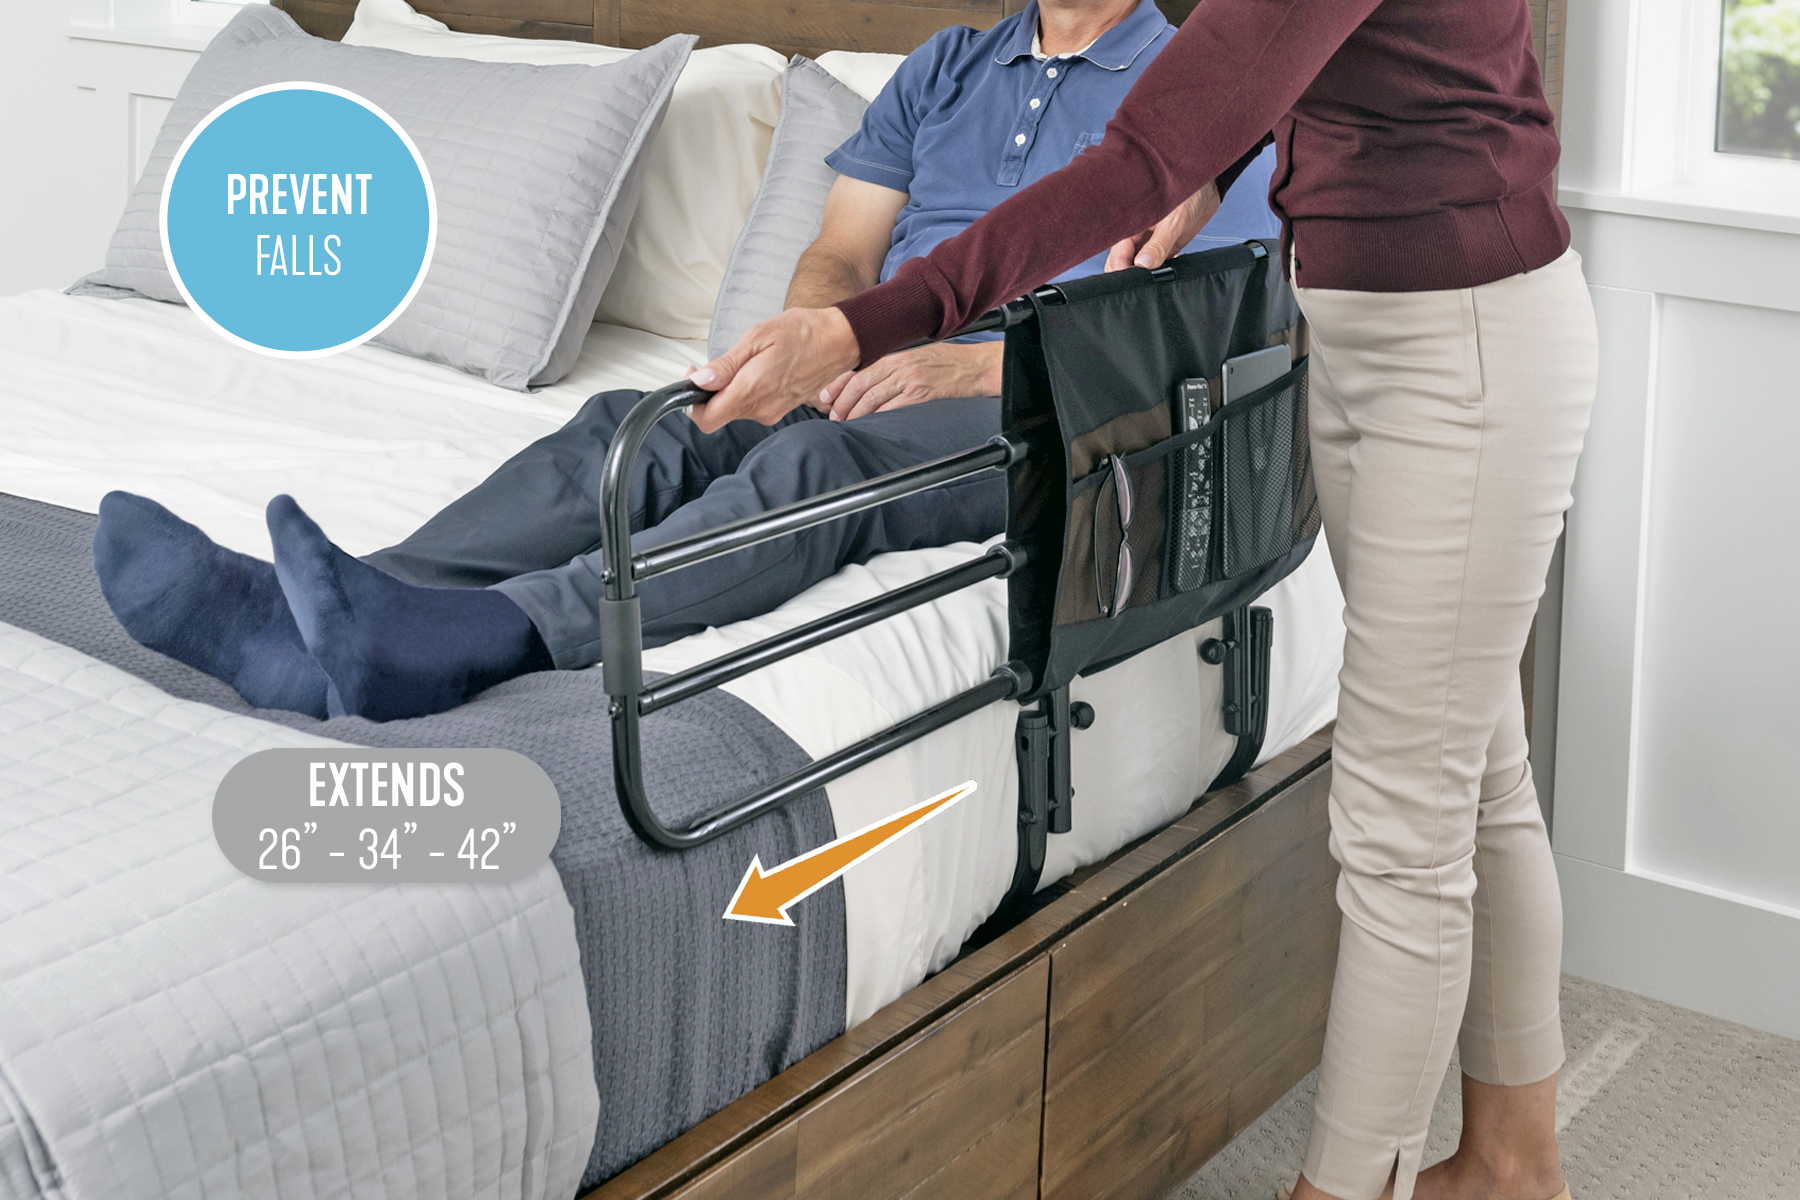 Bed Rail for Adults to Prevent Falls 